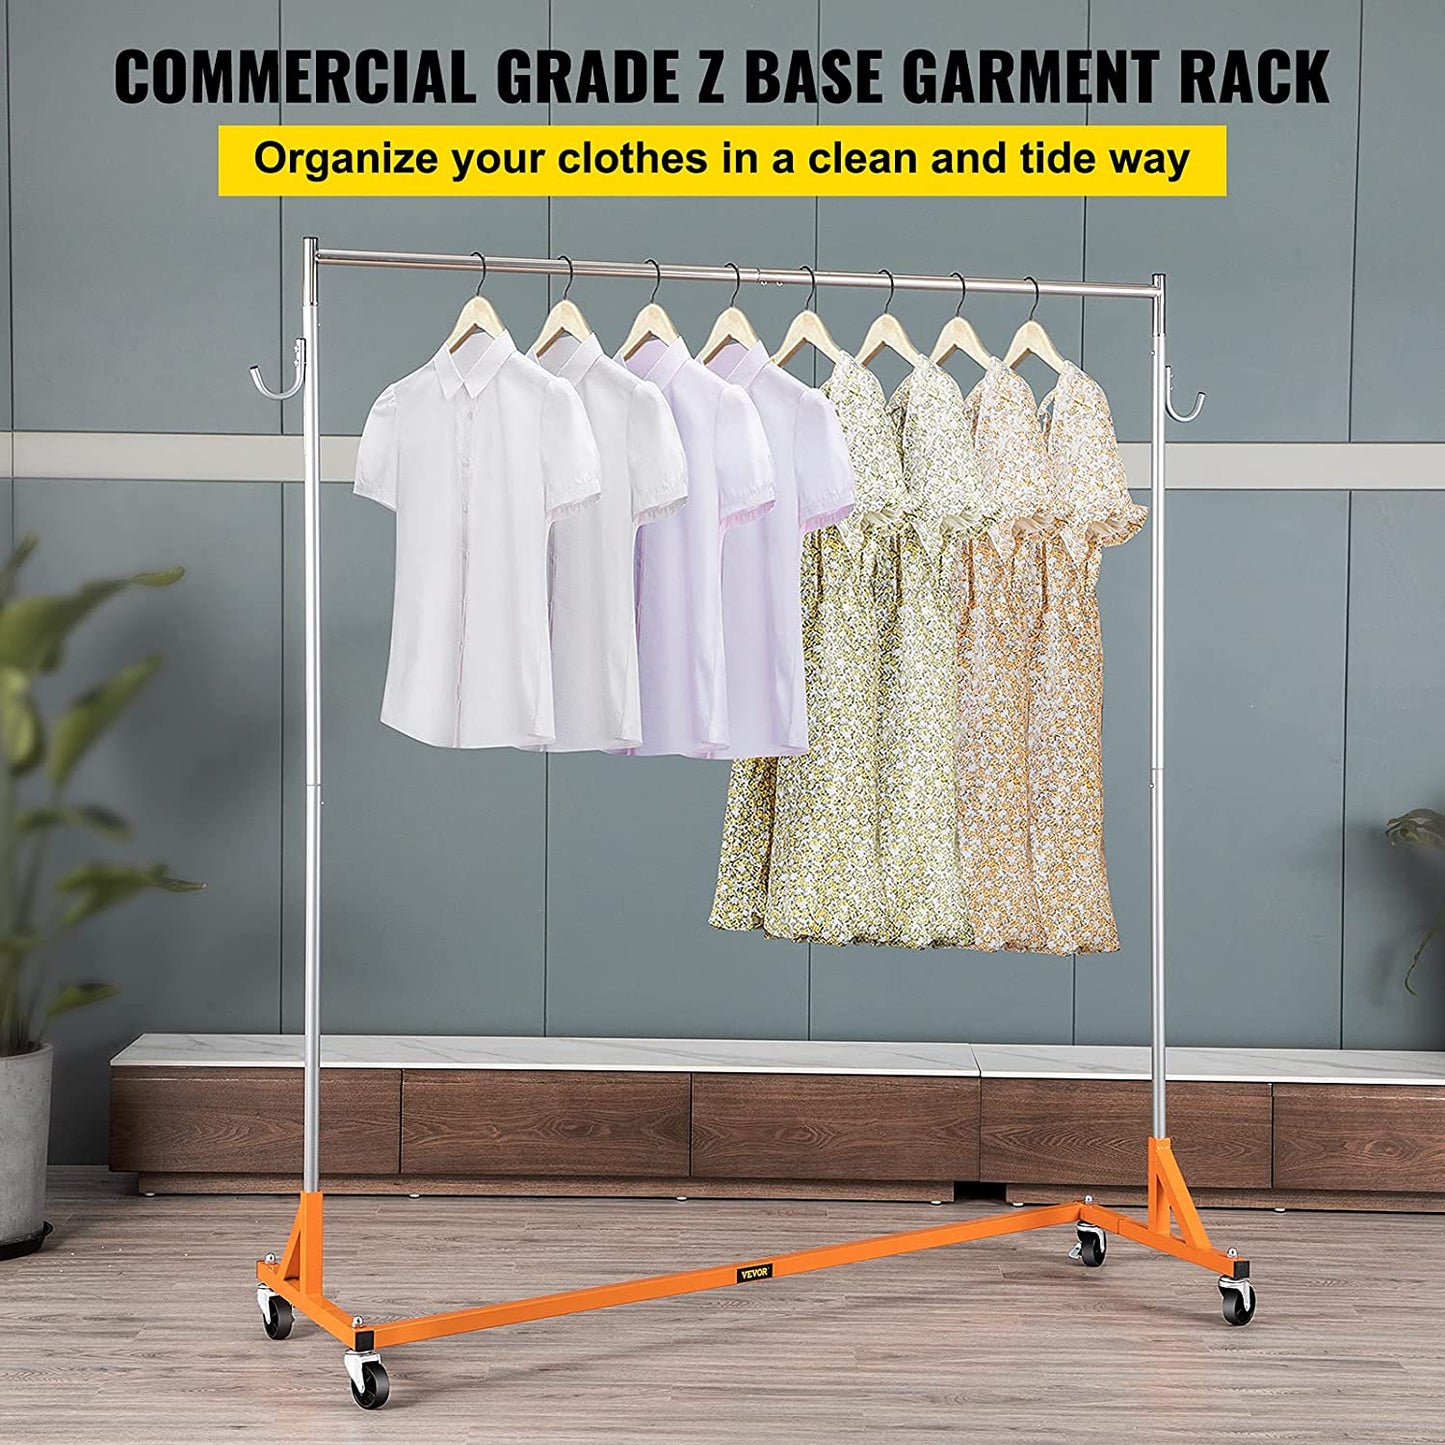 Z Rack, 300 lbs Industrial Grade Z Base Garment Rack, 24" x 63" x 71" Height Adjustable Clothes Rack, Sturdy Steel Heavy Duty Clothing Rack w/ Lockable Casters for Home Garment Store Orange